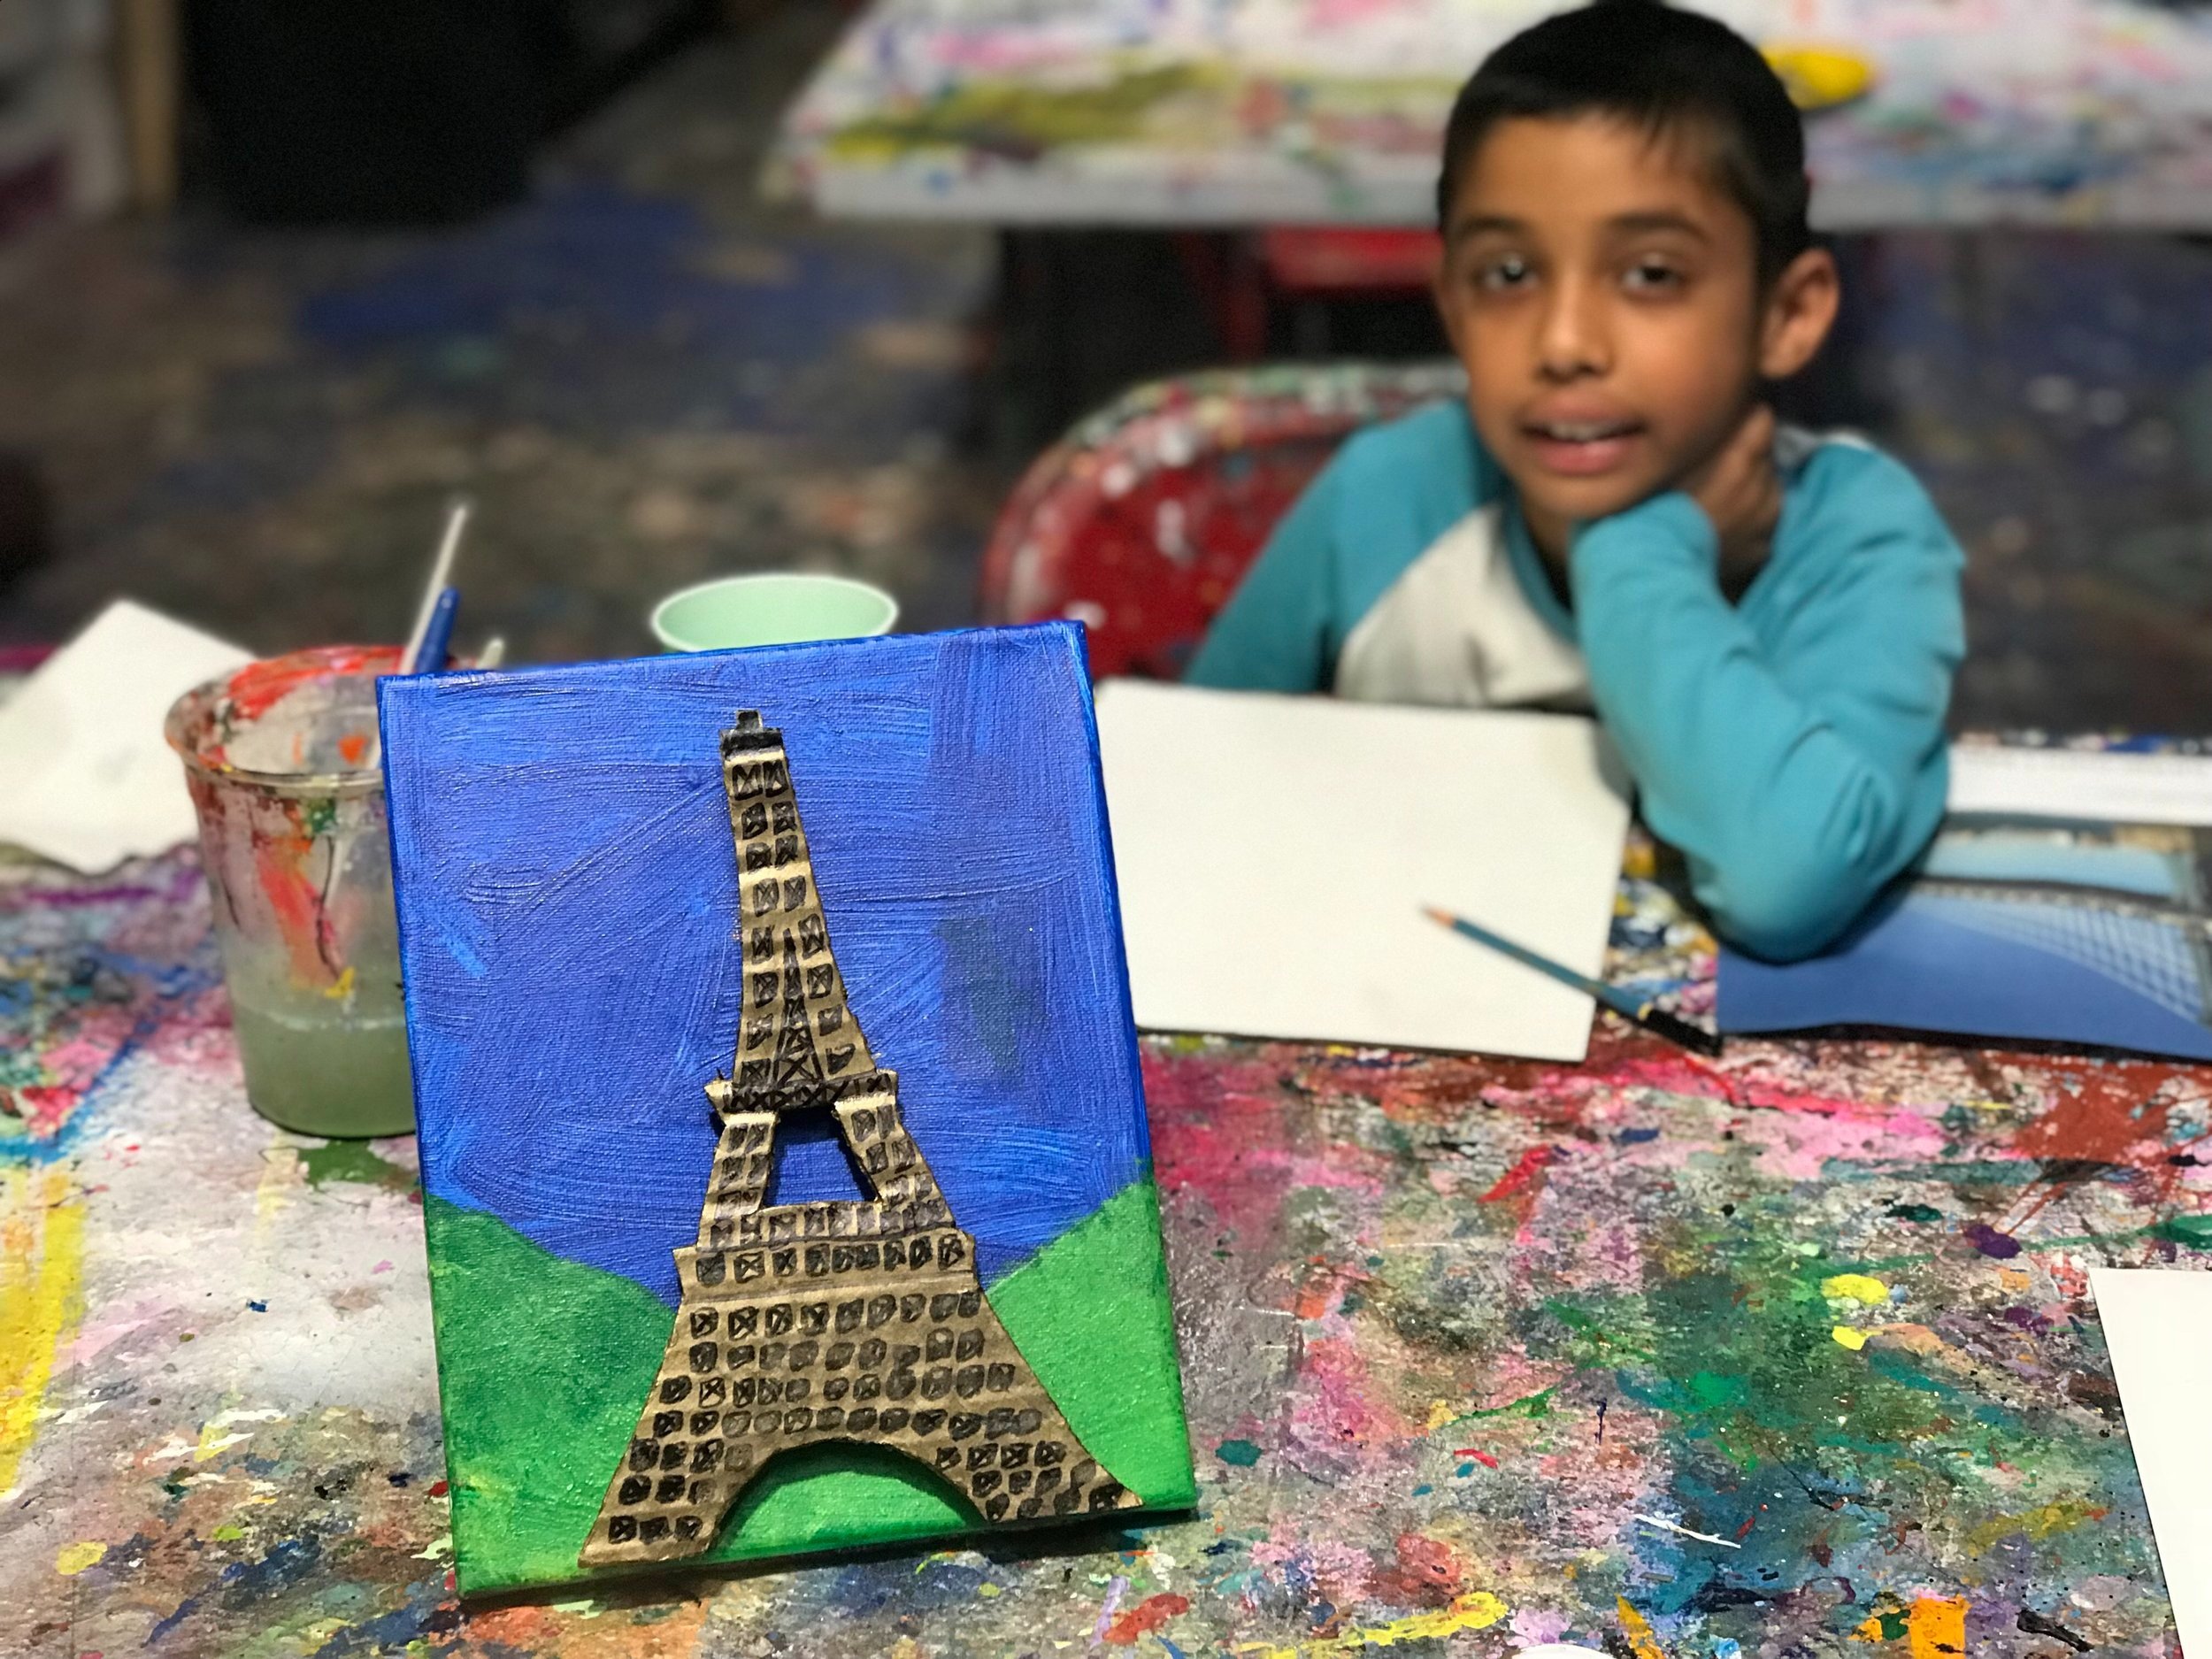 Kids' art studios are the new play room